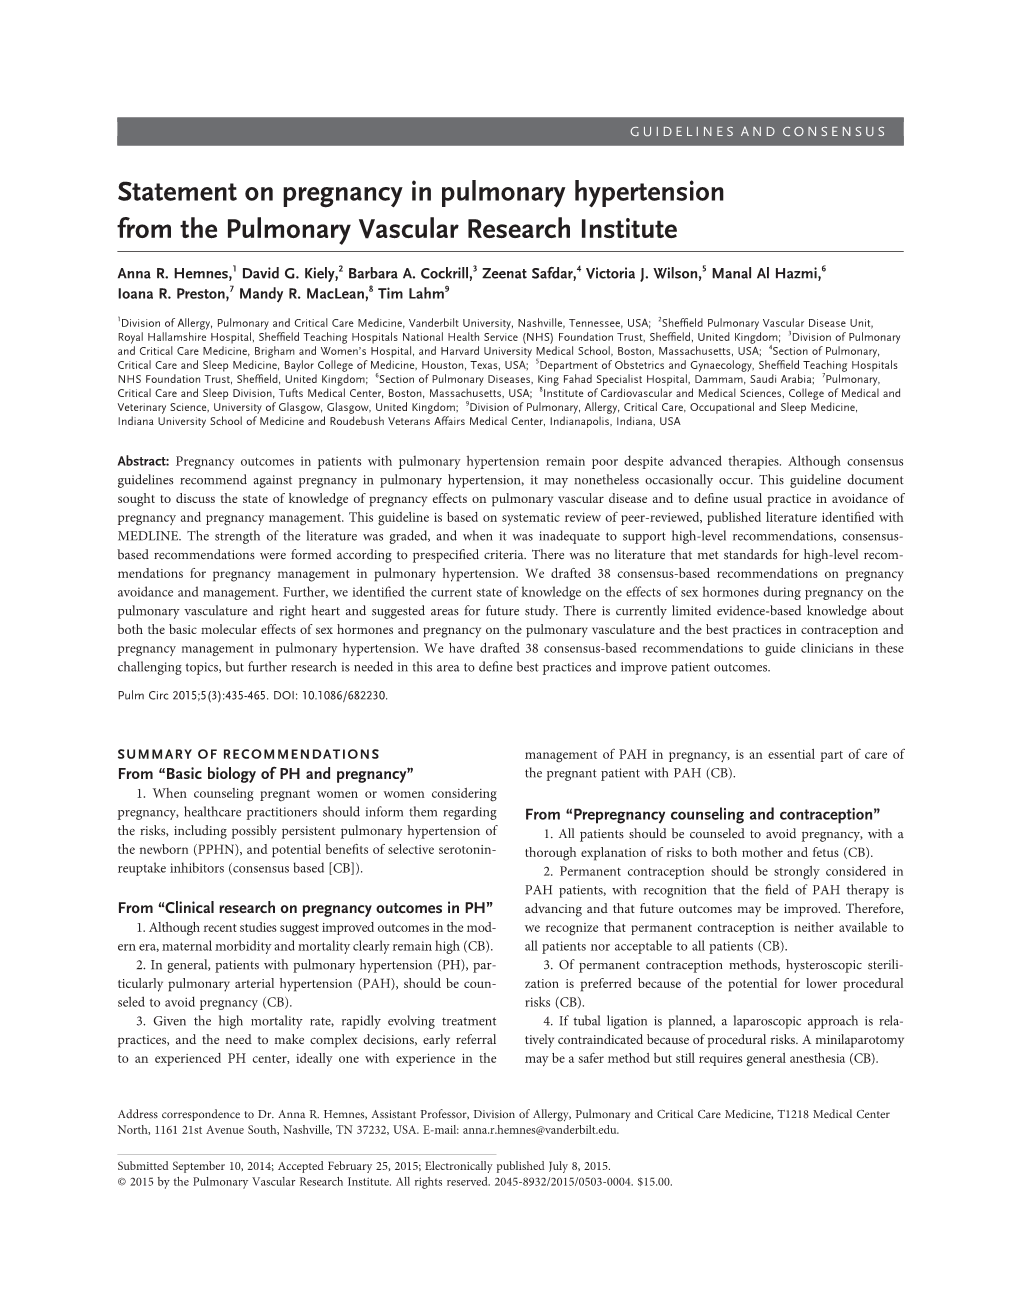 Statement on Pregnancy in Pulmonary Hypertension from the Pulmonary Vascular Research Institute